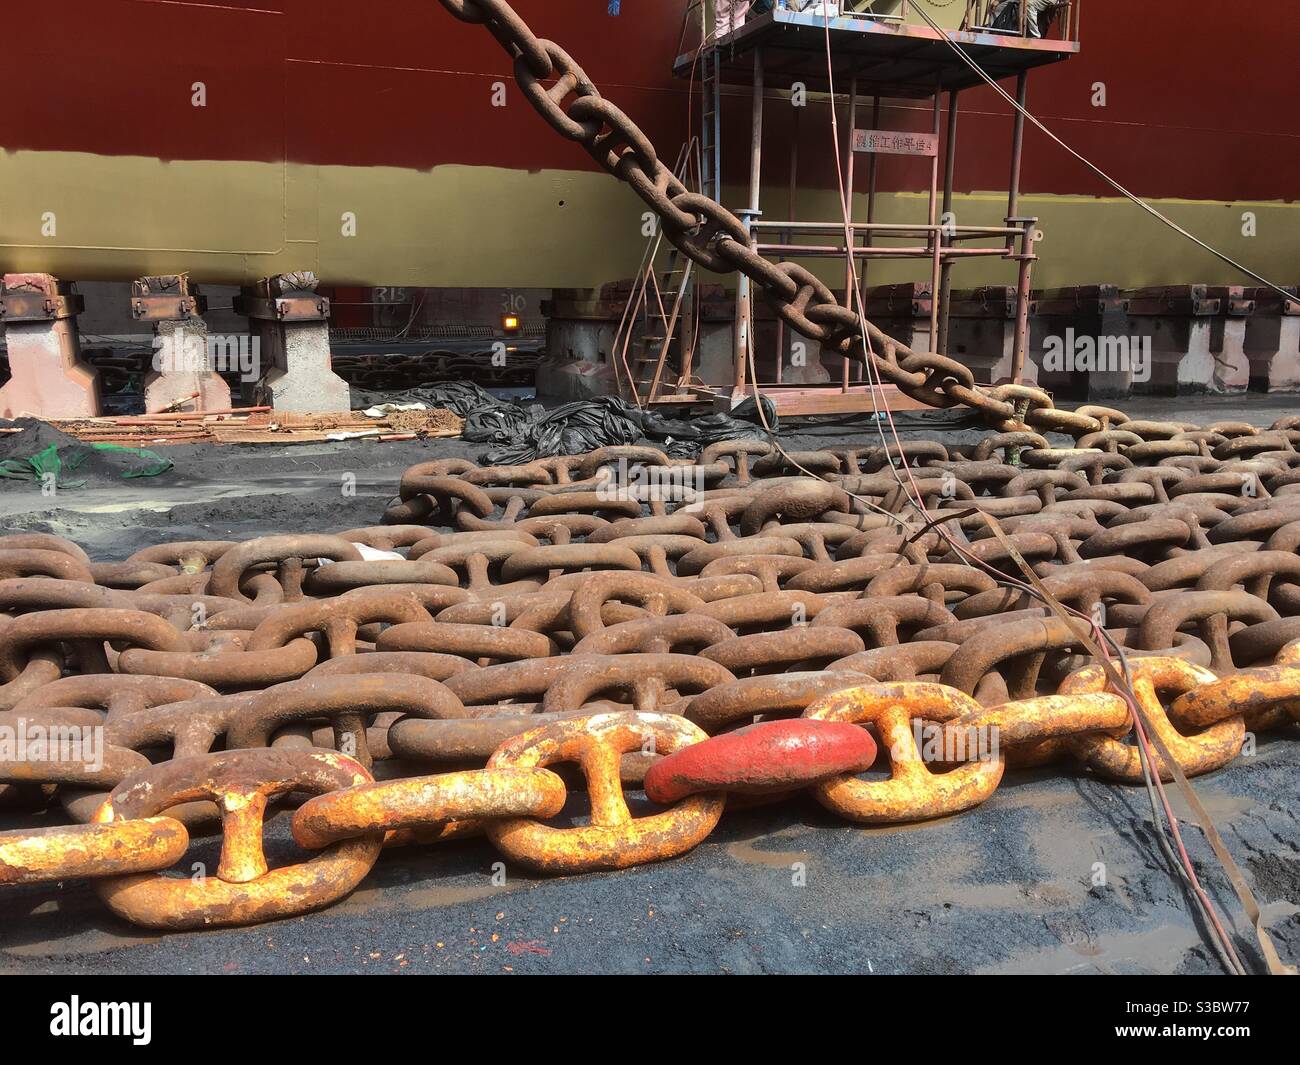 Anchor chain of cargo container vessel staying on supports in